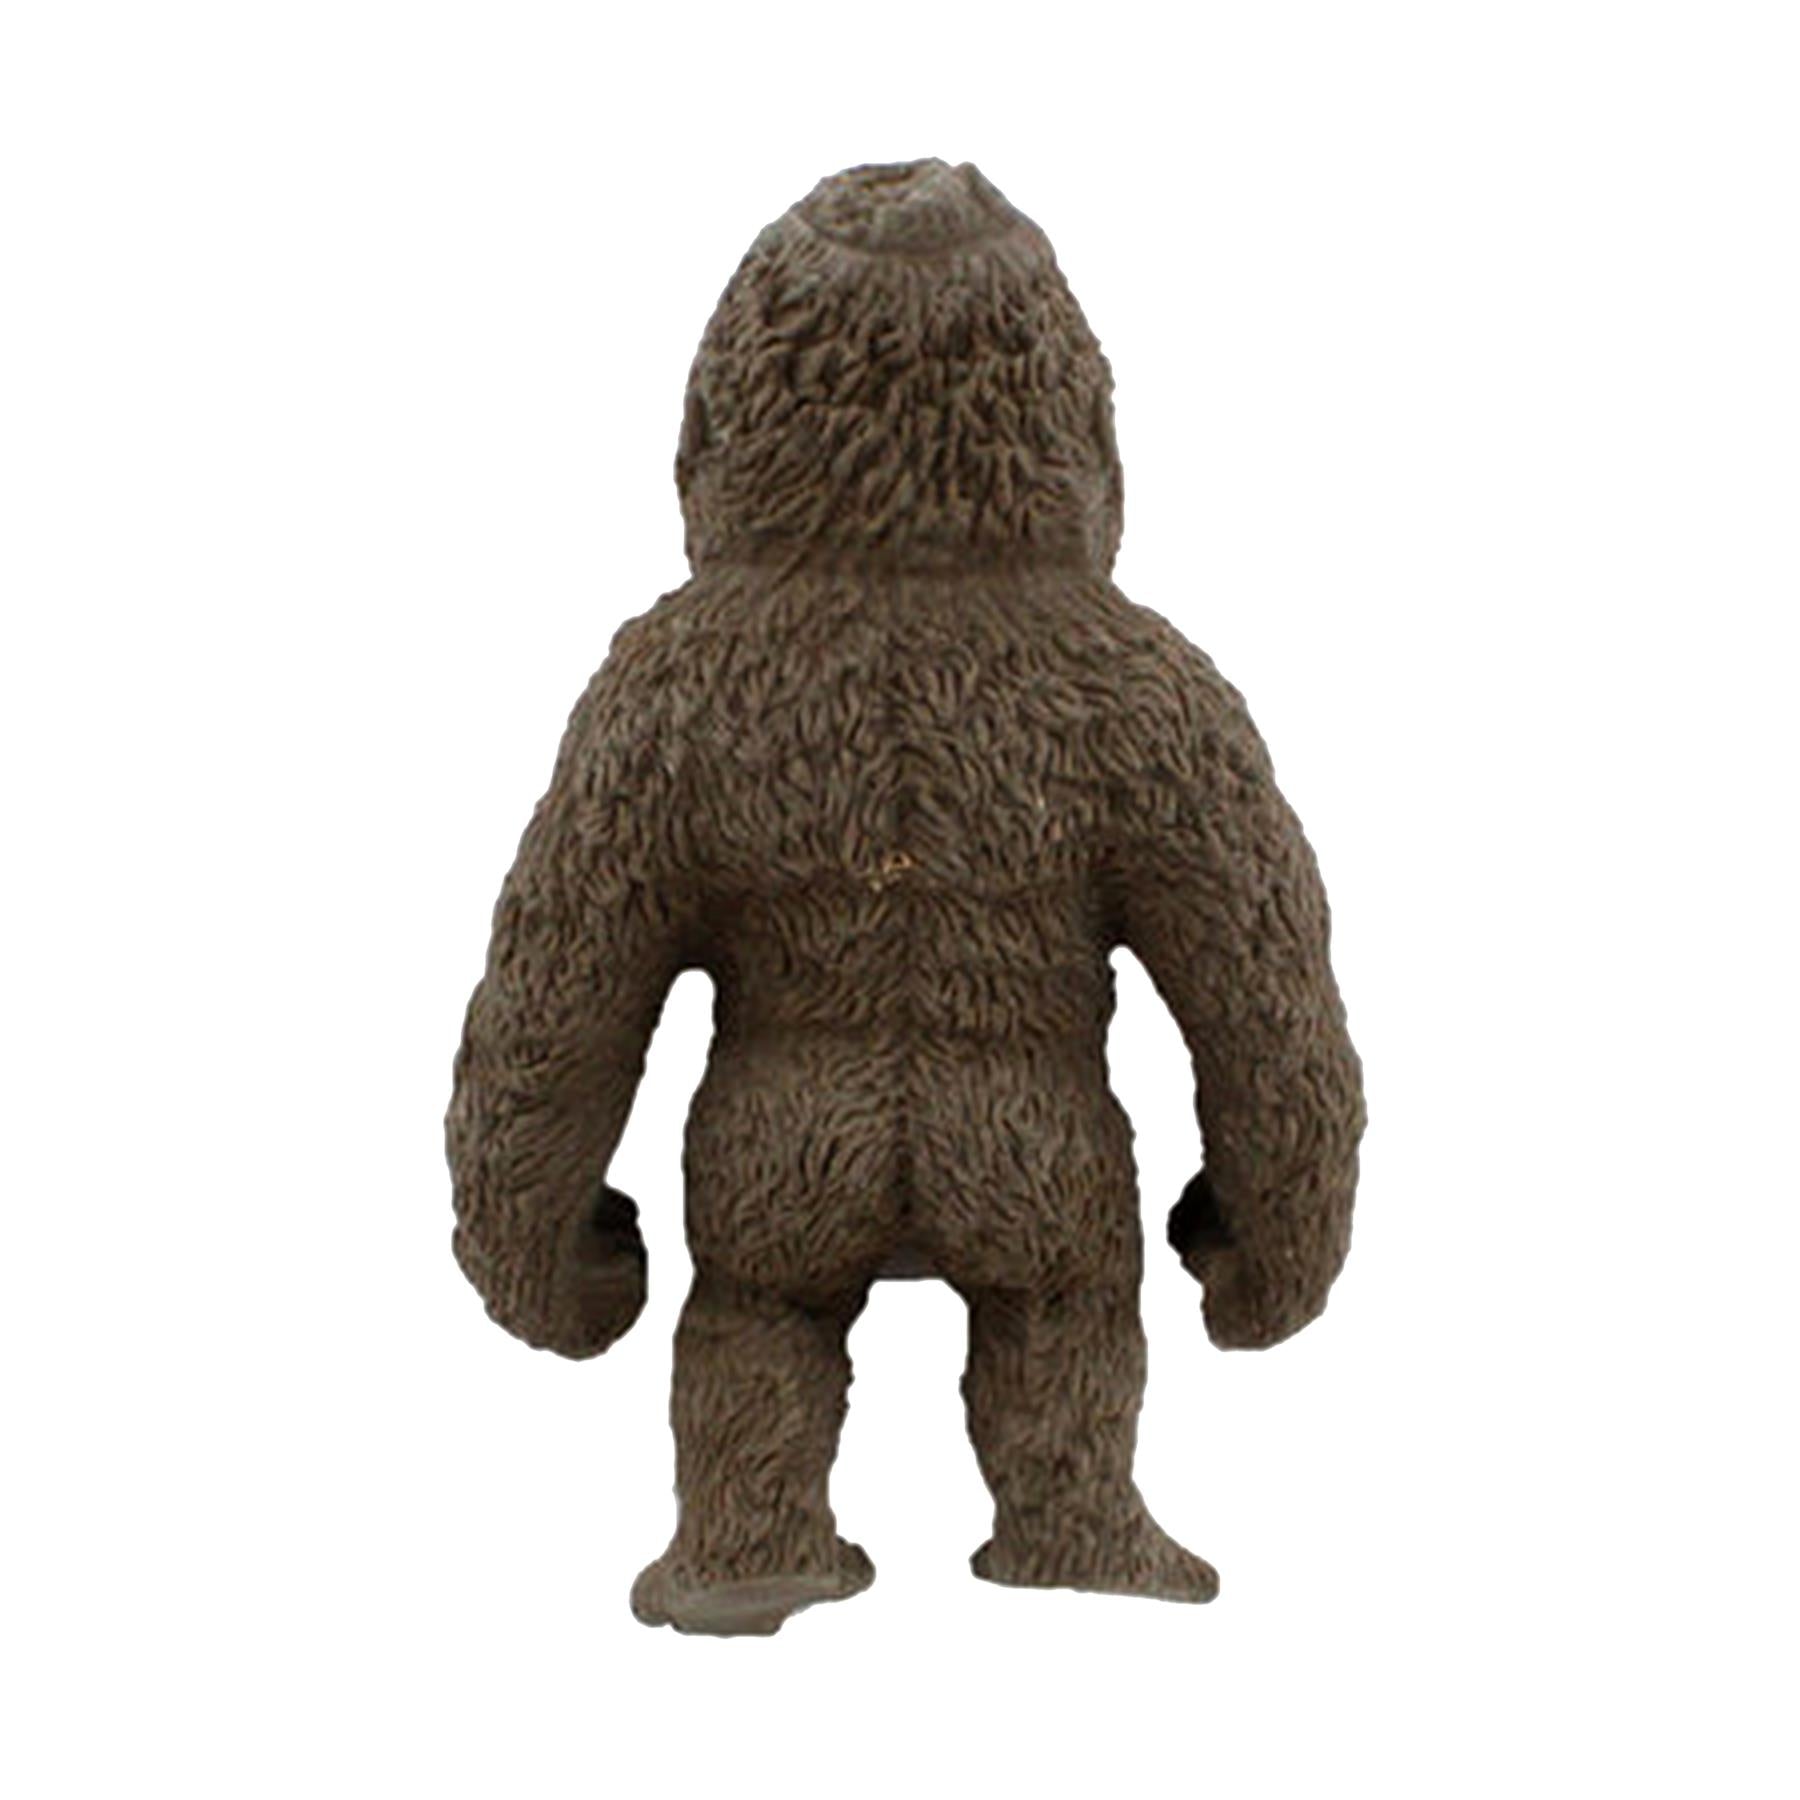 Stretchy Squeeze Gorilla Toy by The Magic Toy Shop - UKBuyZone